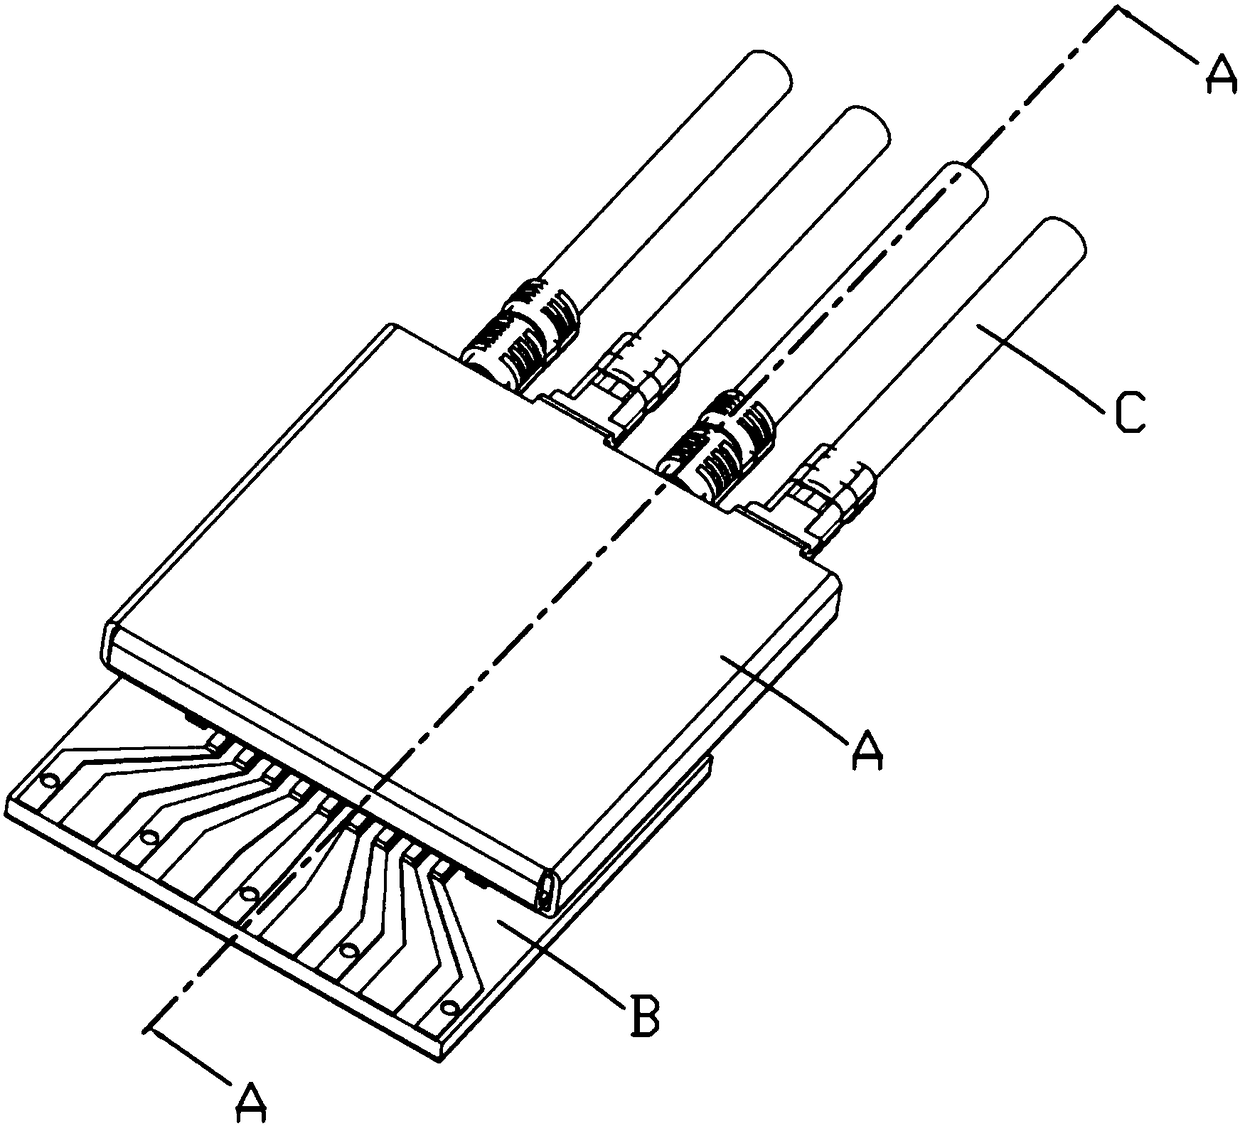 Board-to-board type RF plug, socket and connector assembly